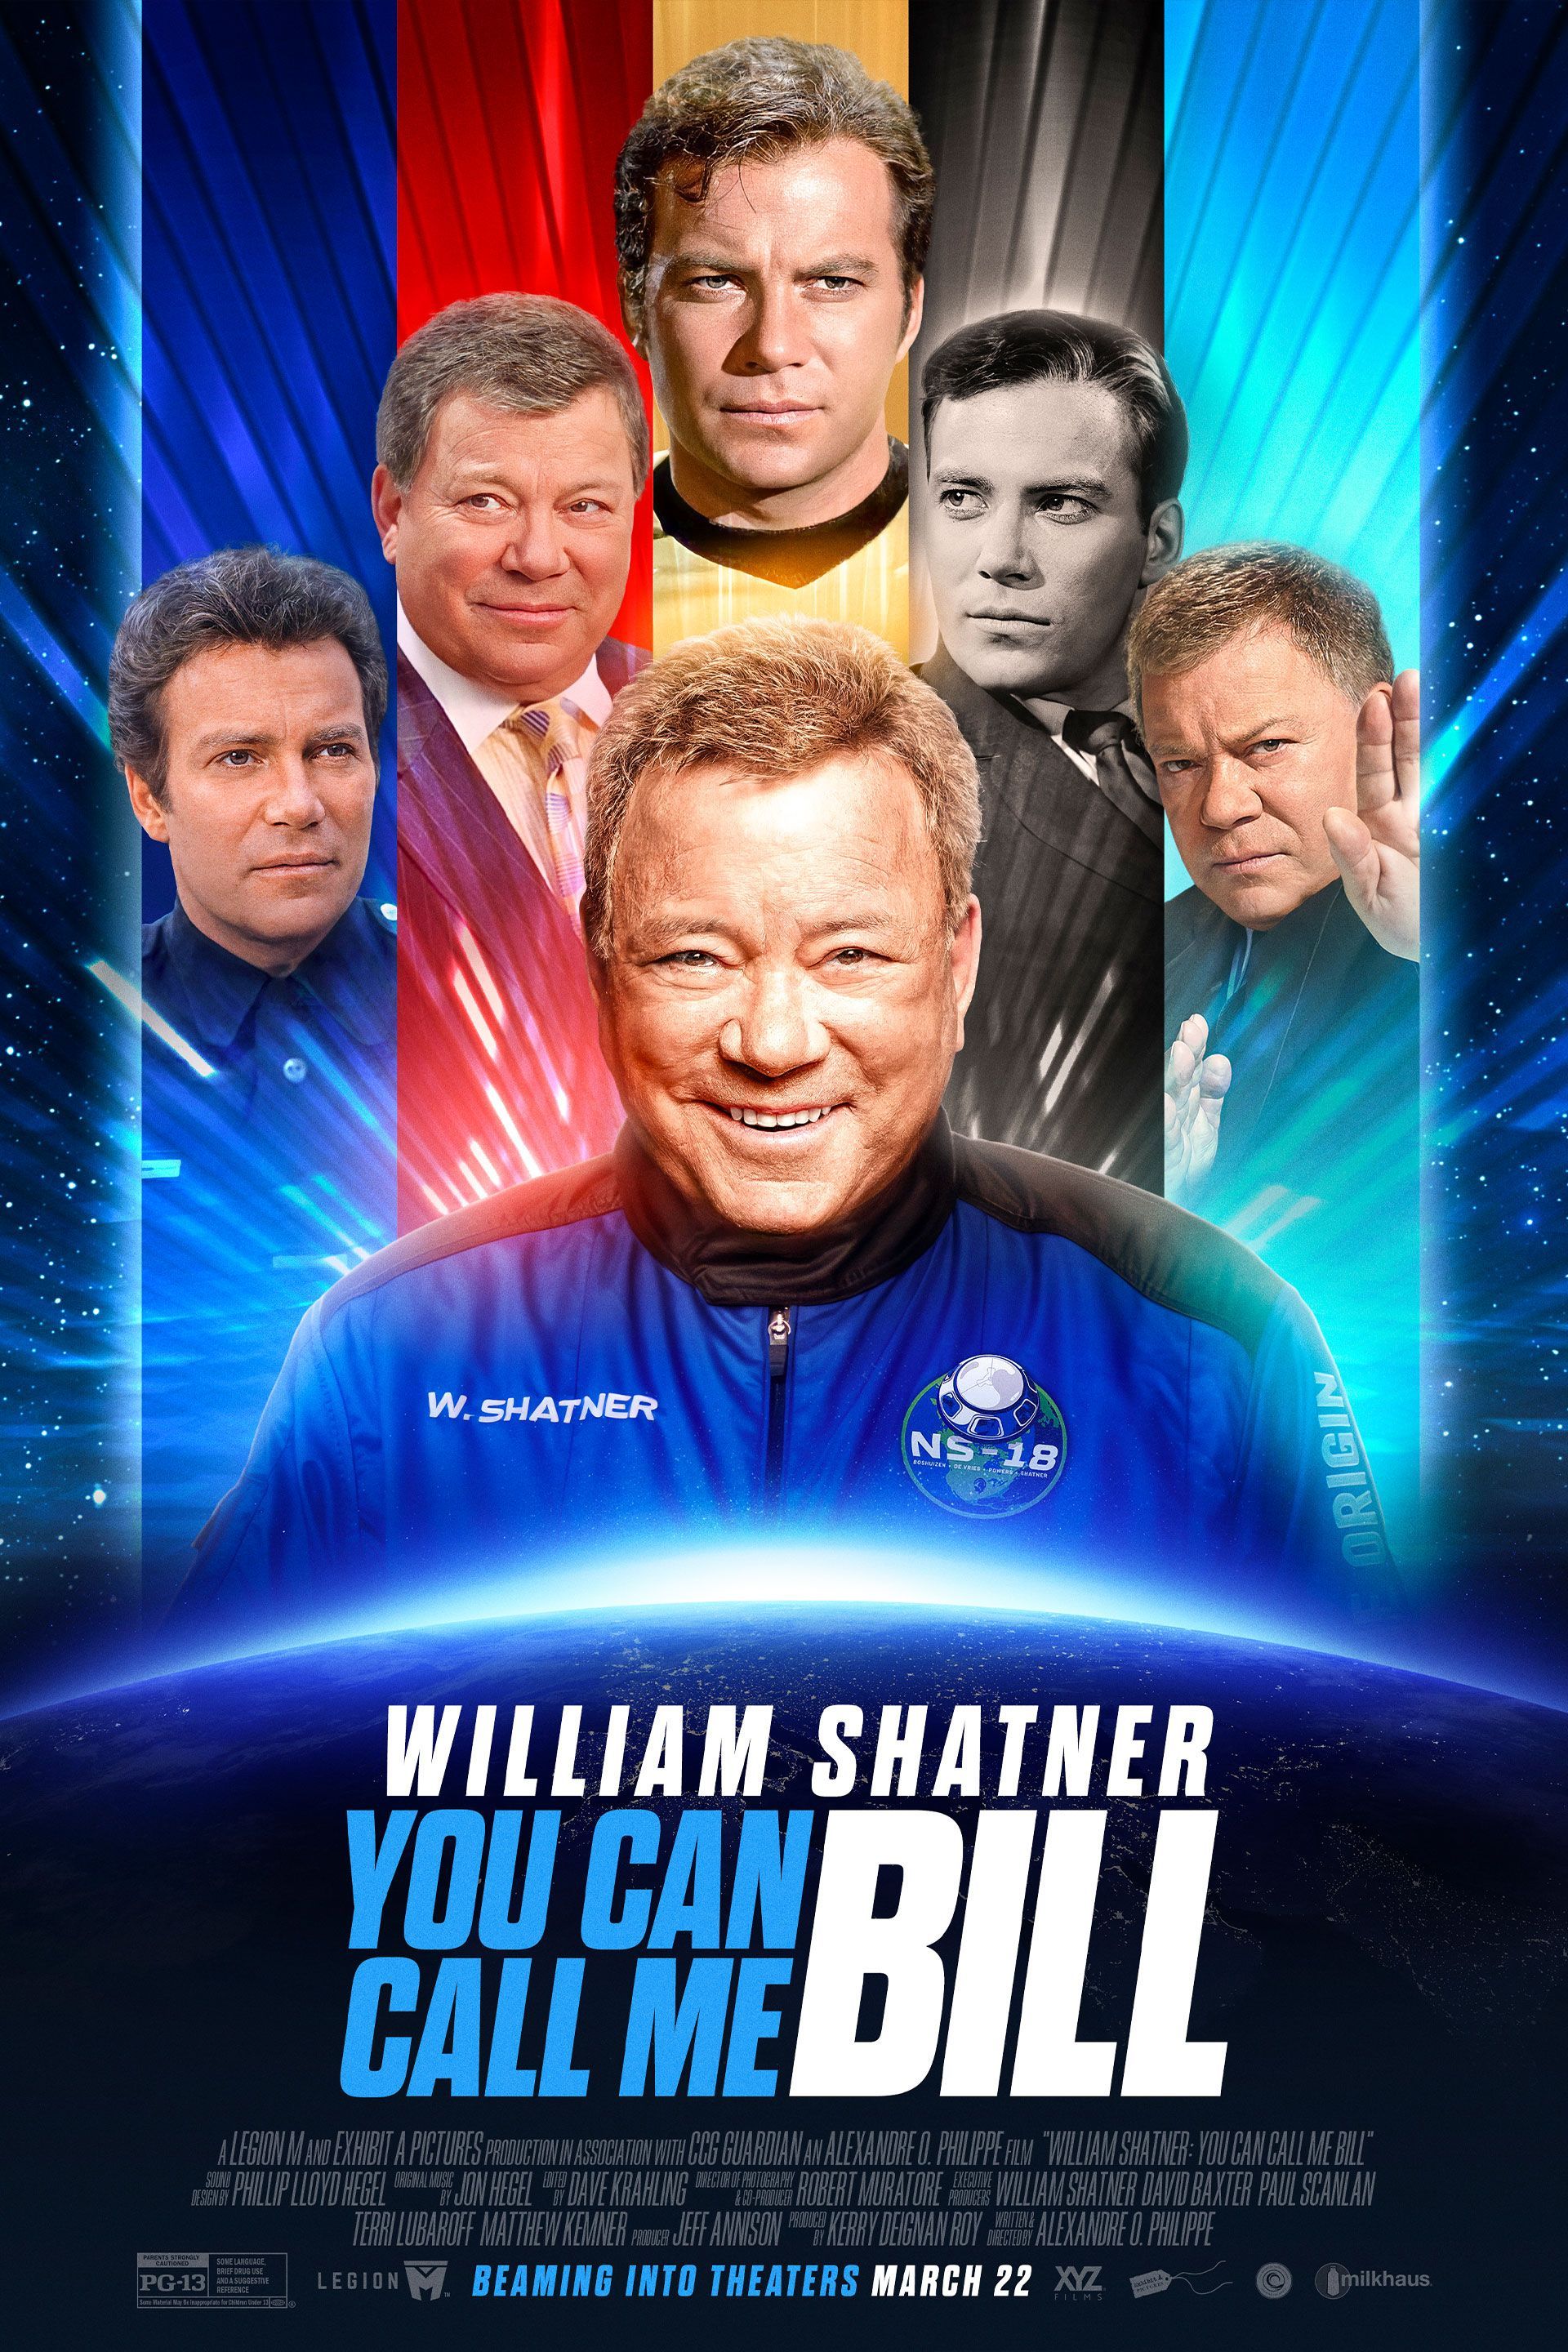 You Can Call Me Bill Movie Poster Showing William Shatner in a Space Suit and as Various Characters Including Captain Kirk from Star Trek